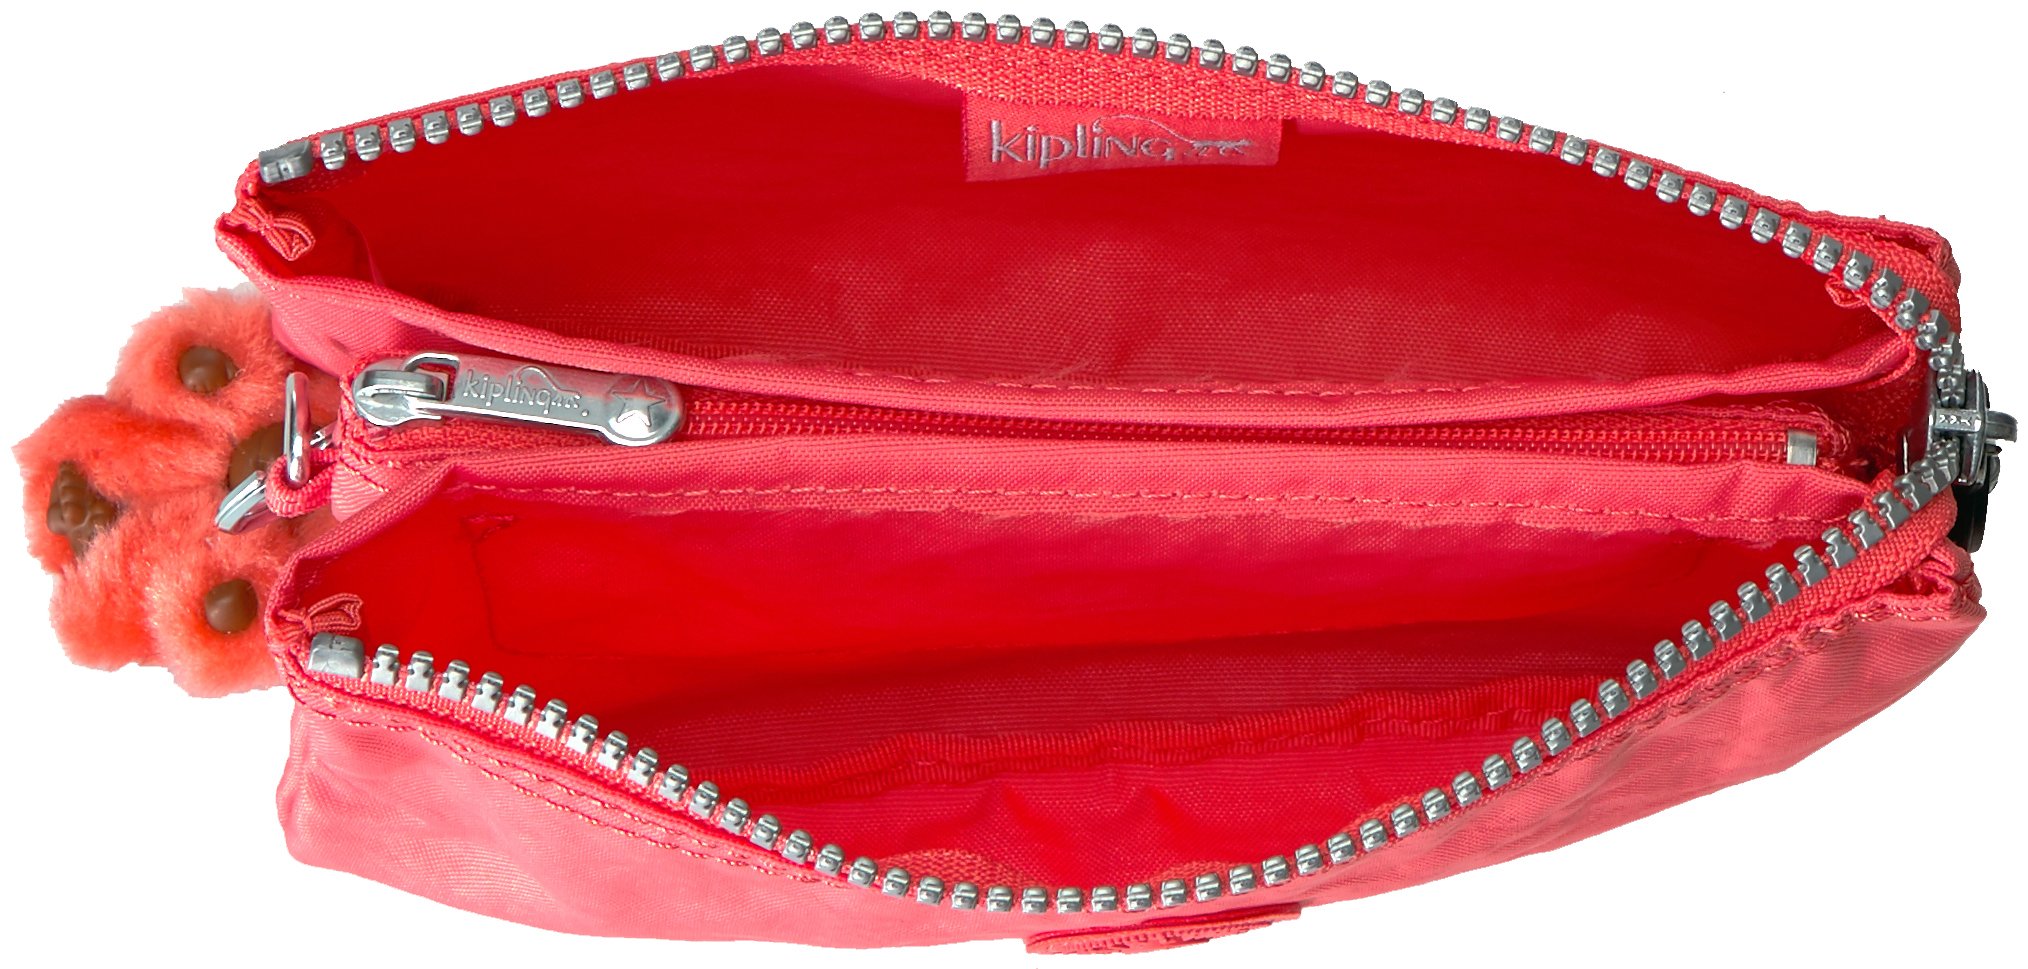 Kipling Creativity Large Pouch Regal Ruby Patch, Regal Red Patch